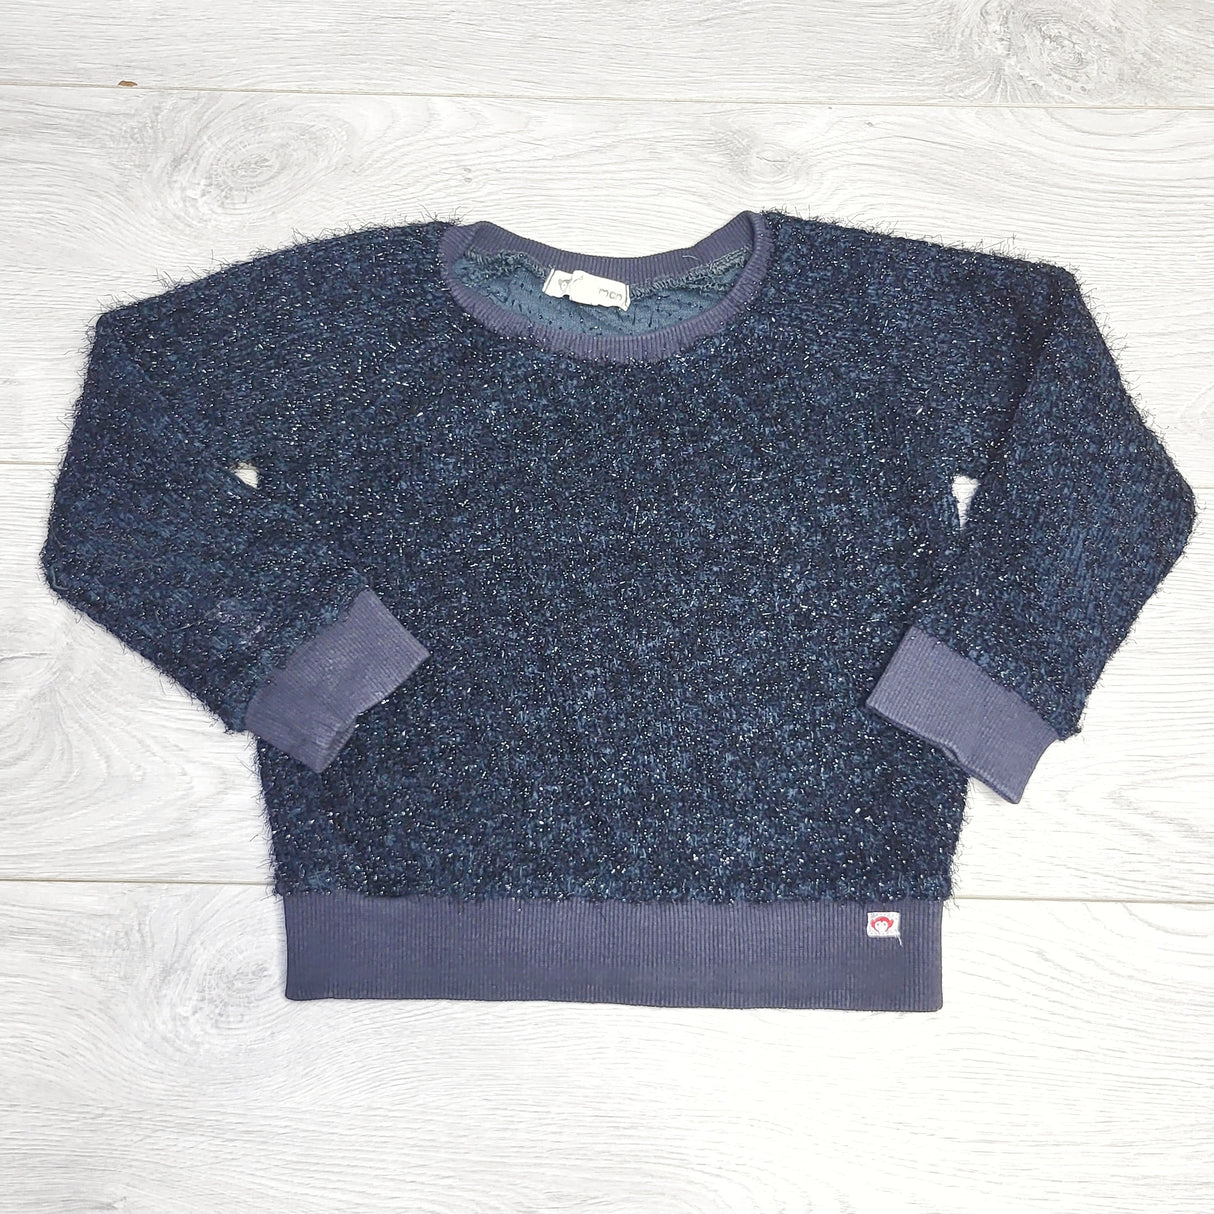 HWIL1 - Appaman "Willow" top in Midnight navy. Size 5T